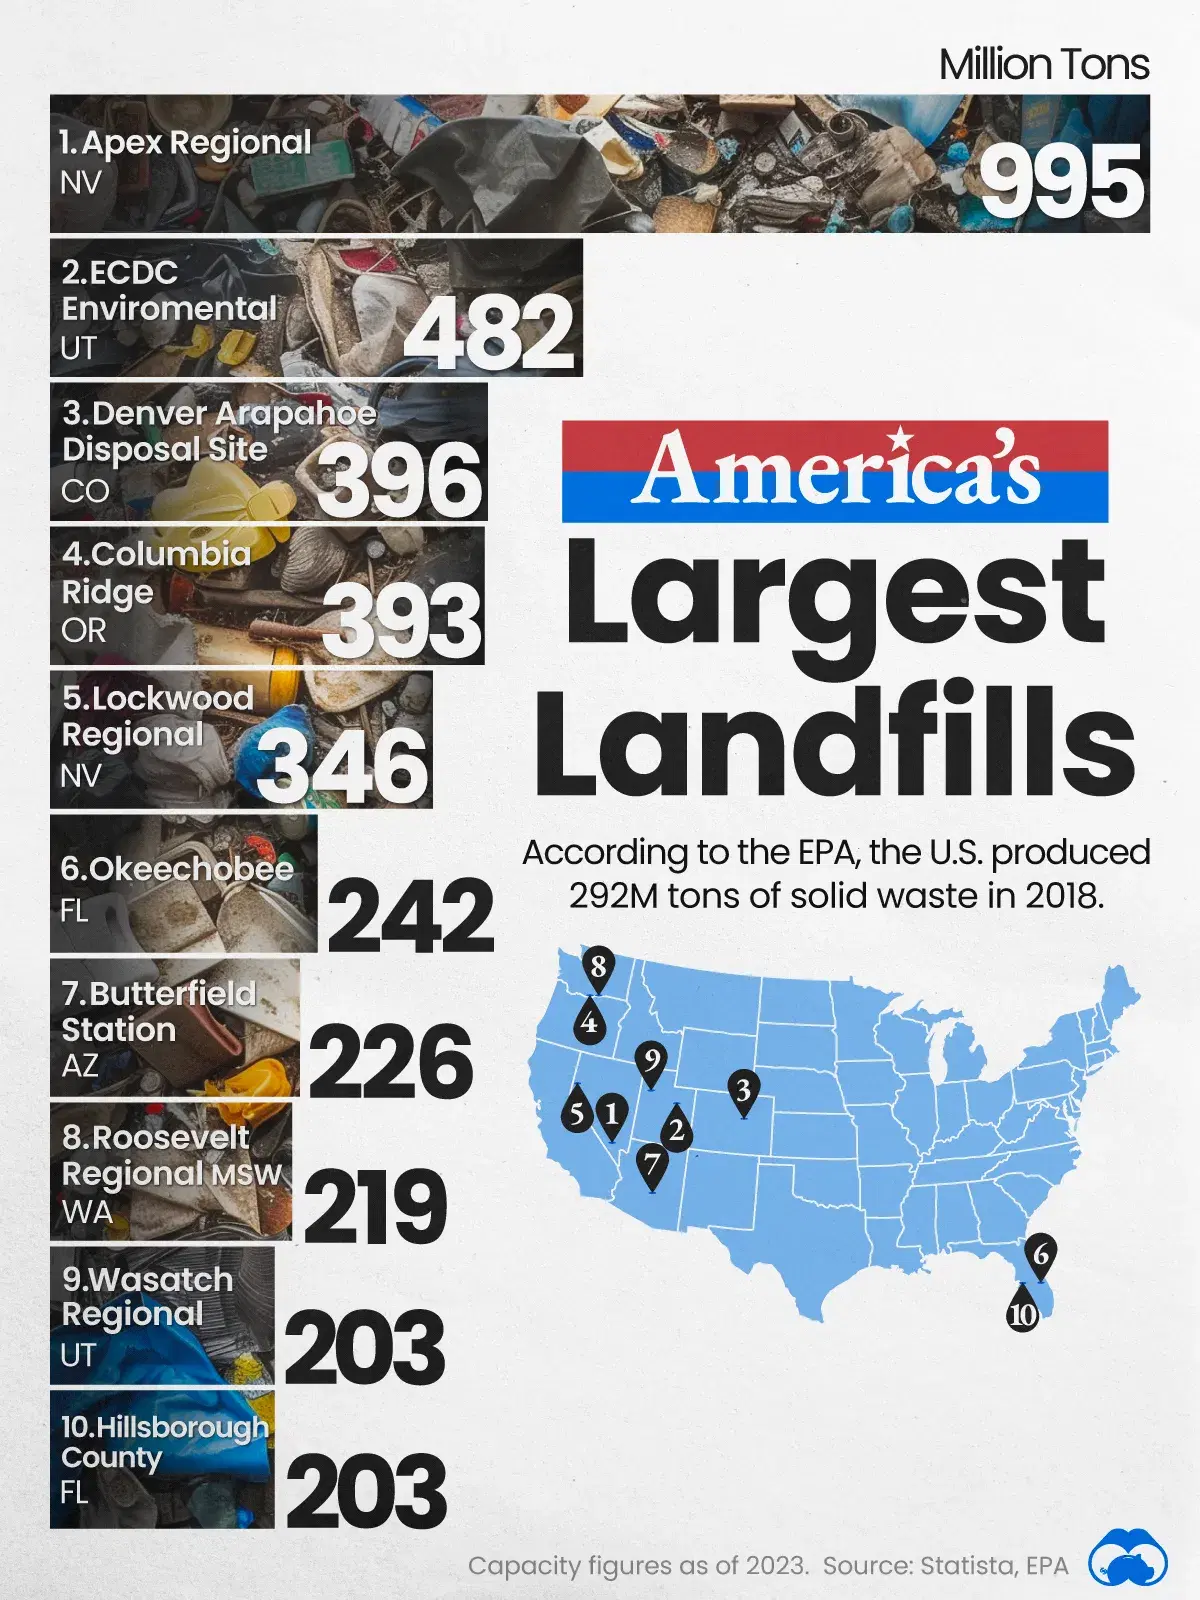 Nevada is Home to America’s Largest Landfill 🗑️